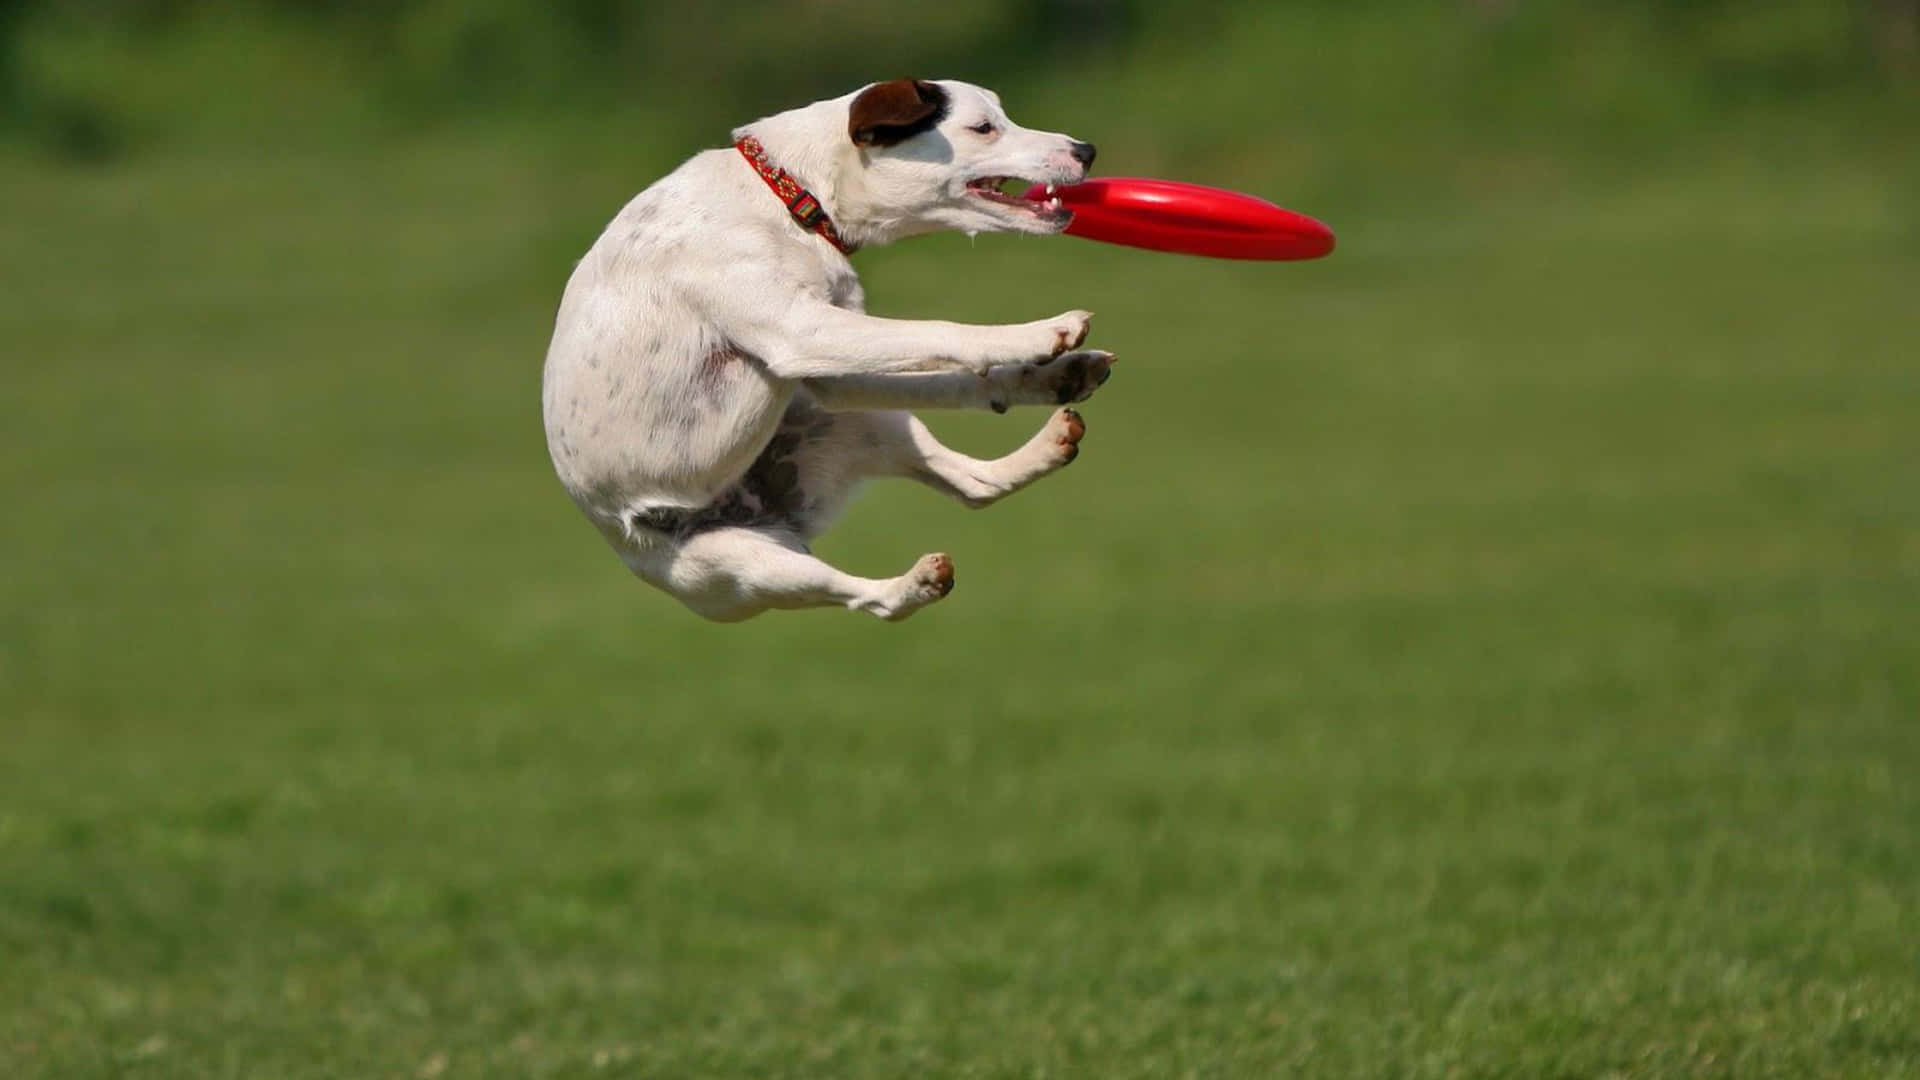 A Dog Catching A Frisbee